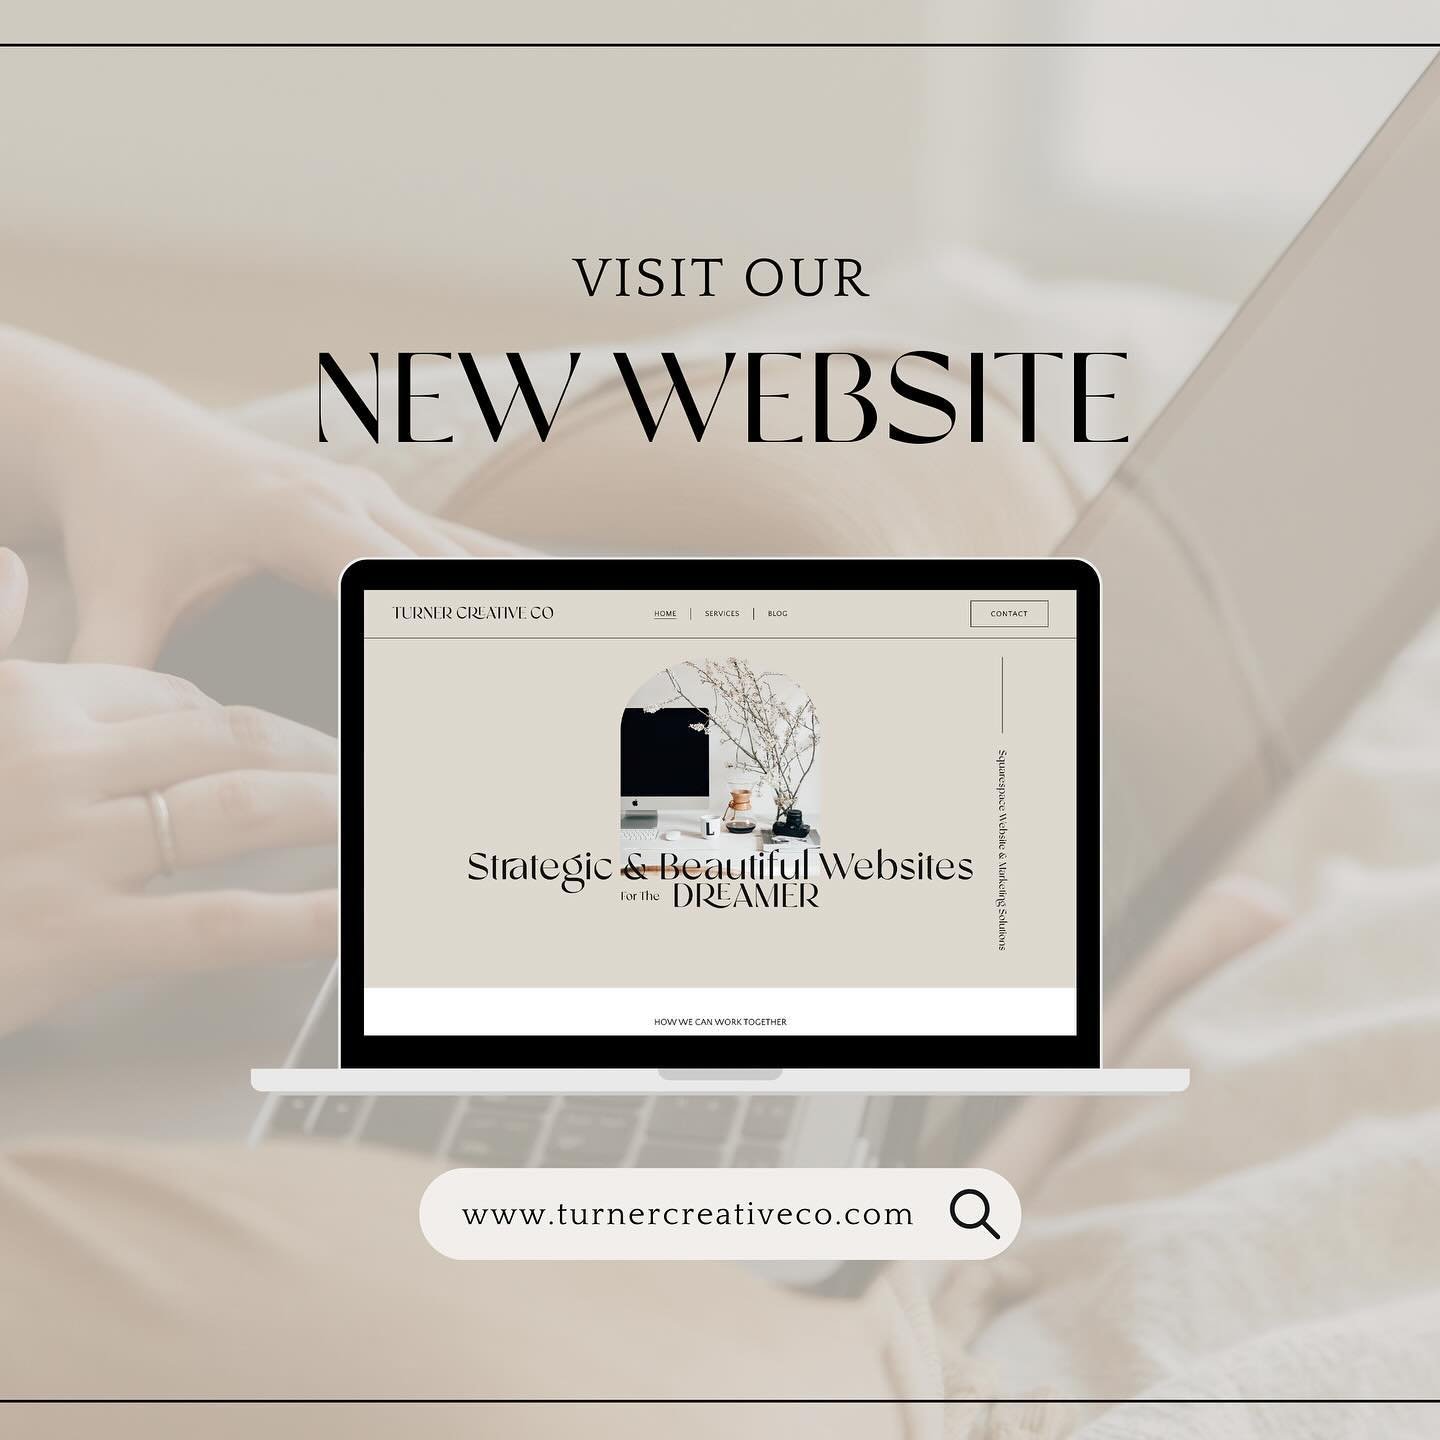 New Website Alert! 🚨 
.
A new year is just around the corner and what better way to start off fresh than with a new website! We&rsquo;ve been working hard behind the scenes for a little brand refresh and are pumped it&rsquo;s finally live! 🤩
.
Curr